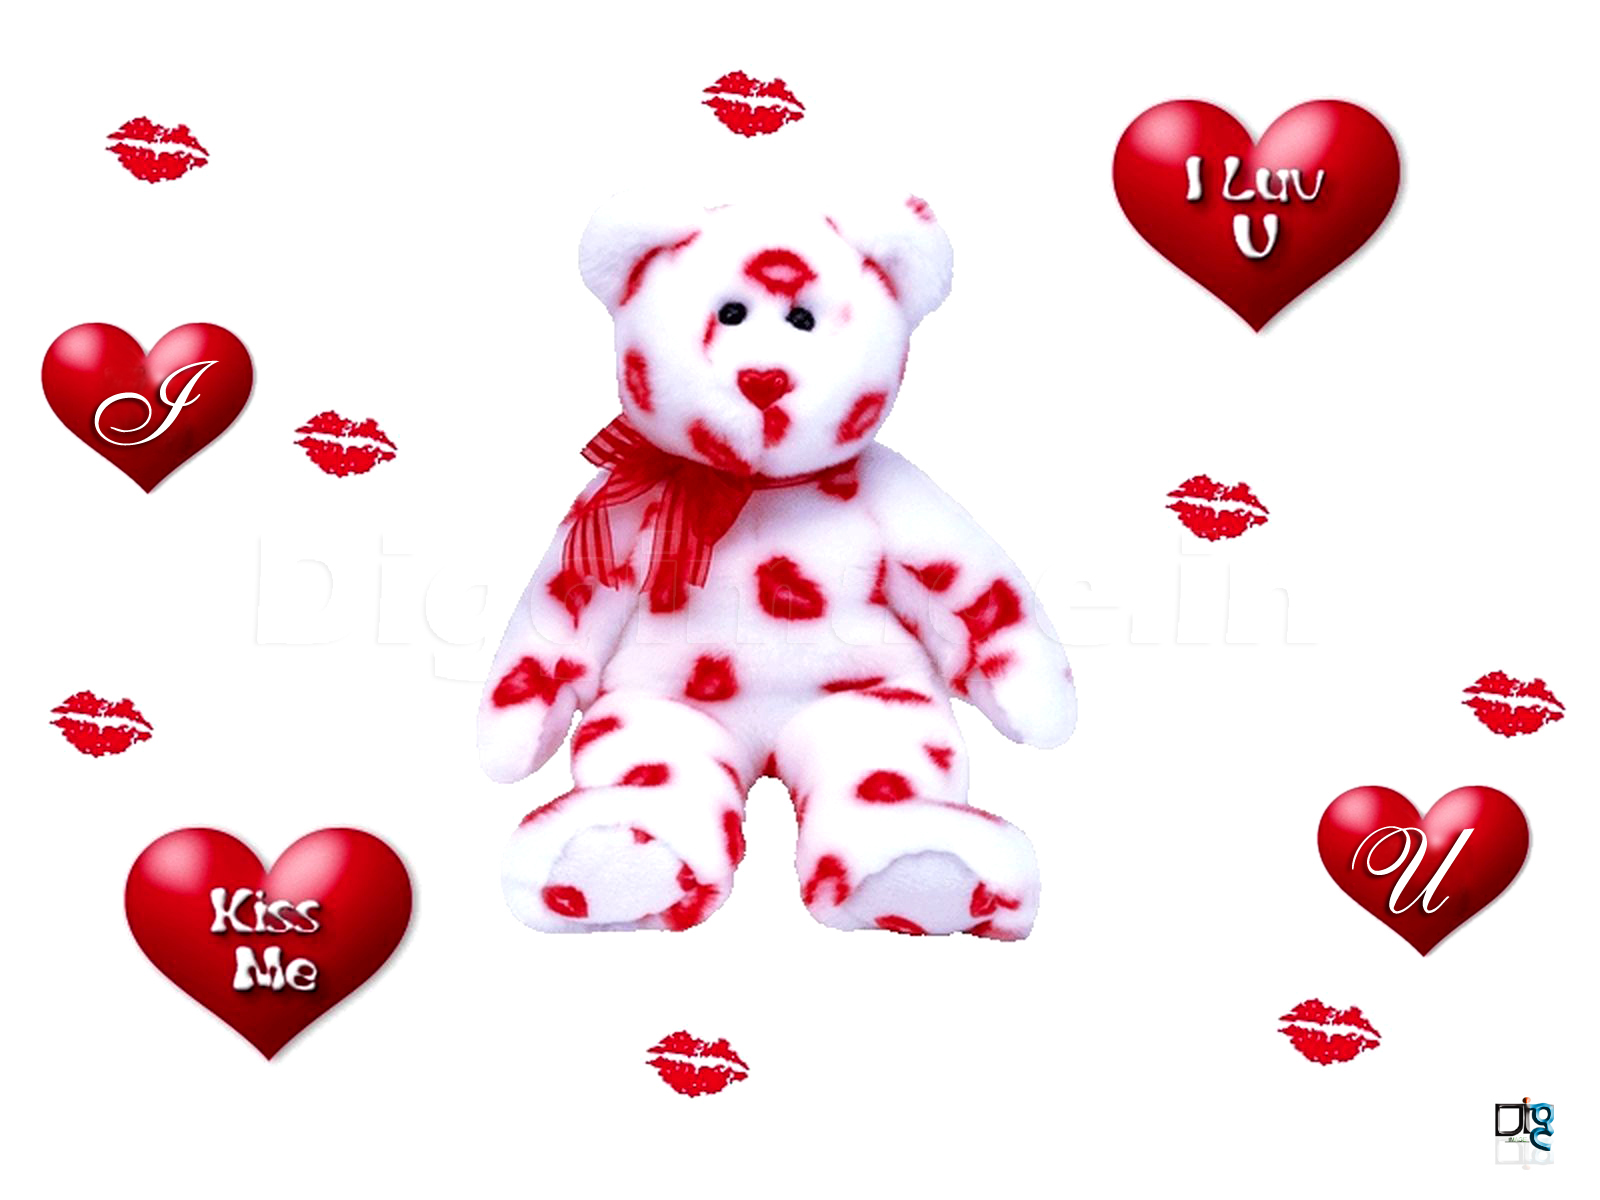 13. I Love You 2 Hd Wallpapers And Pictures For Valentines Day 2014